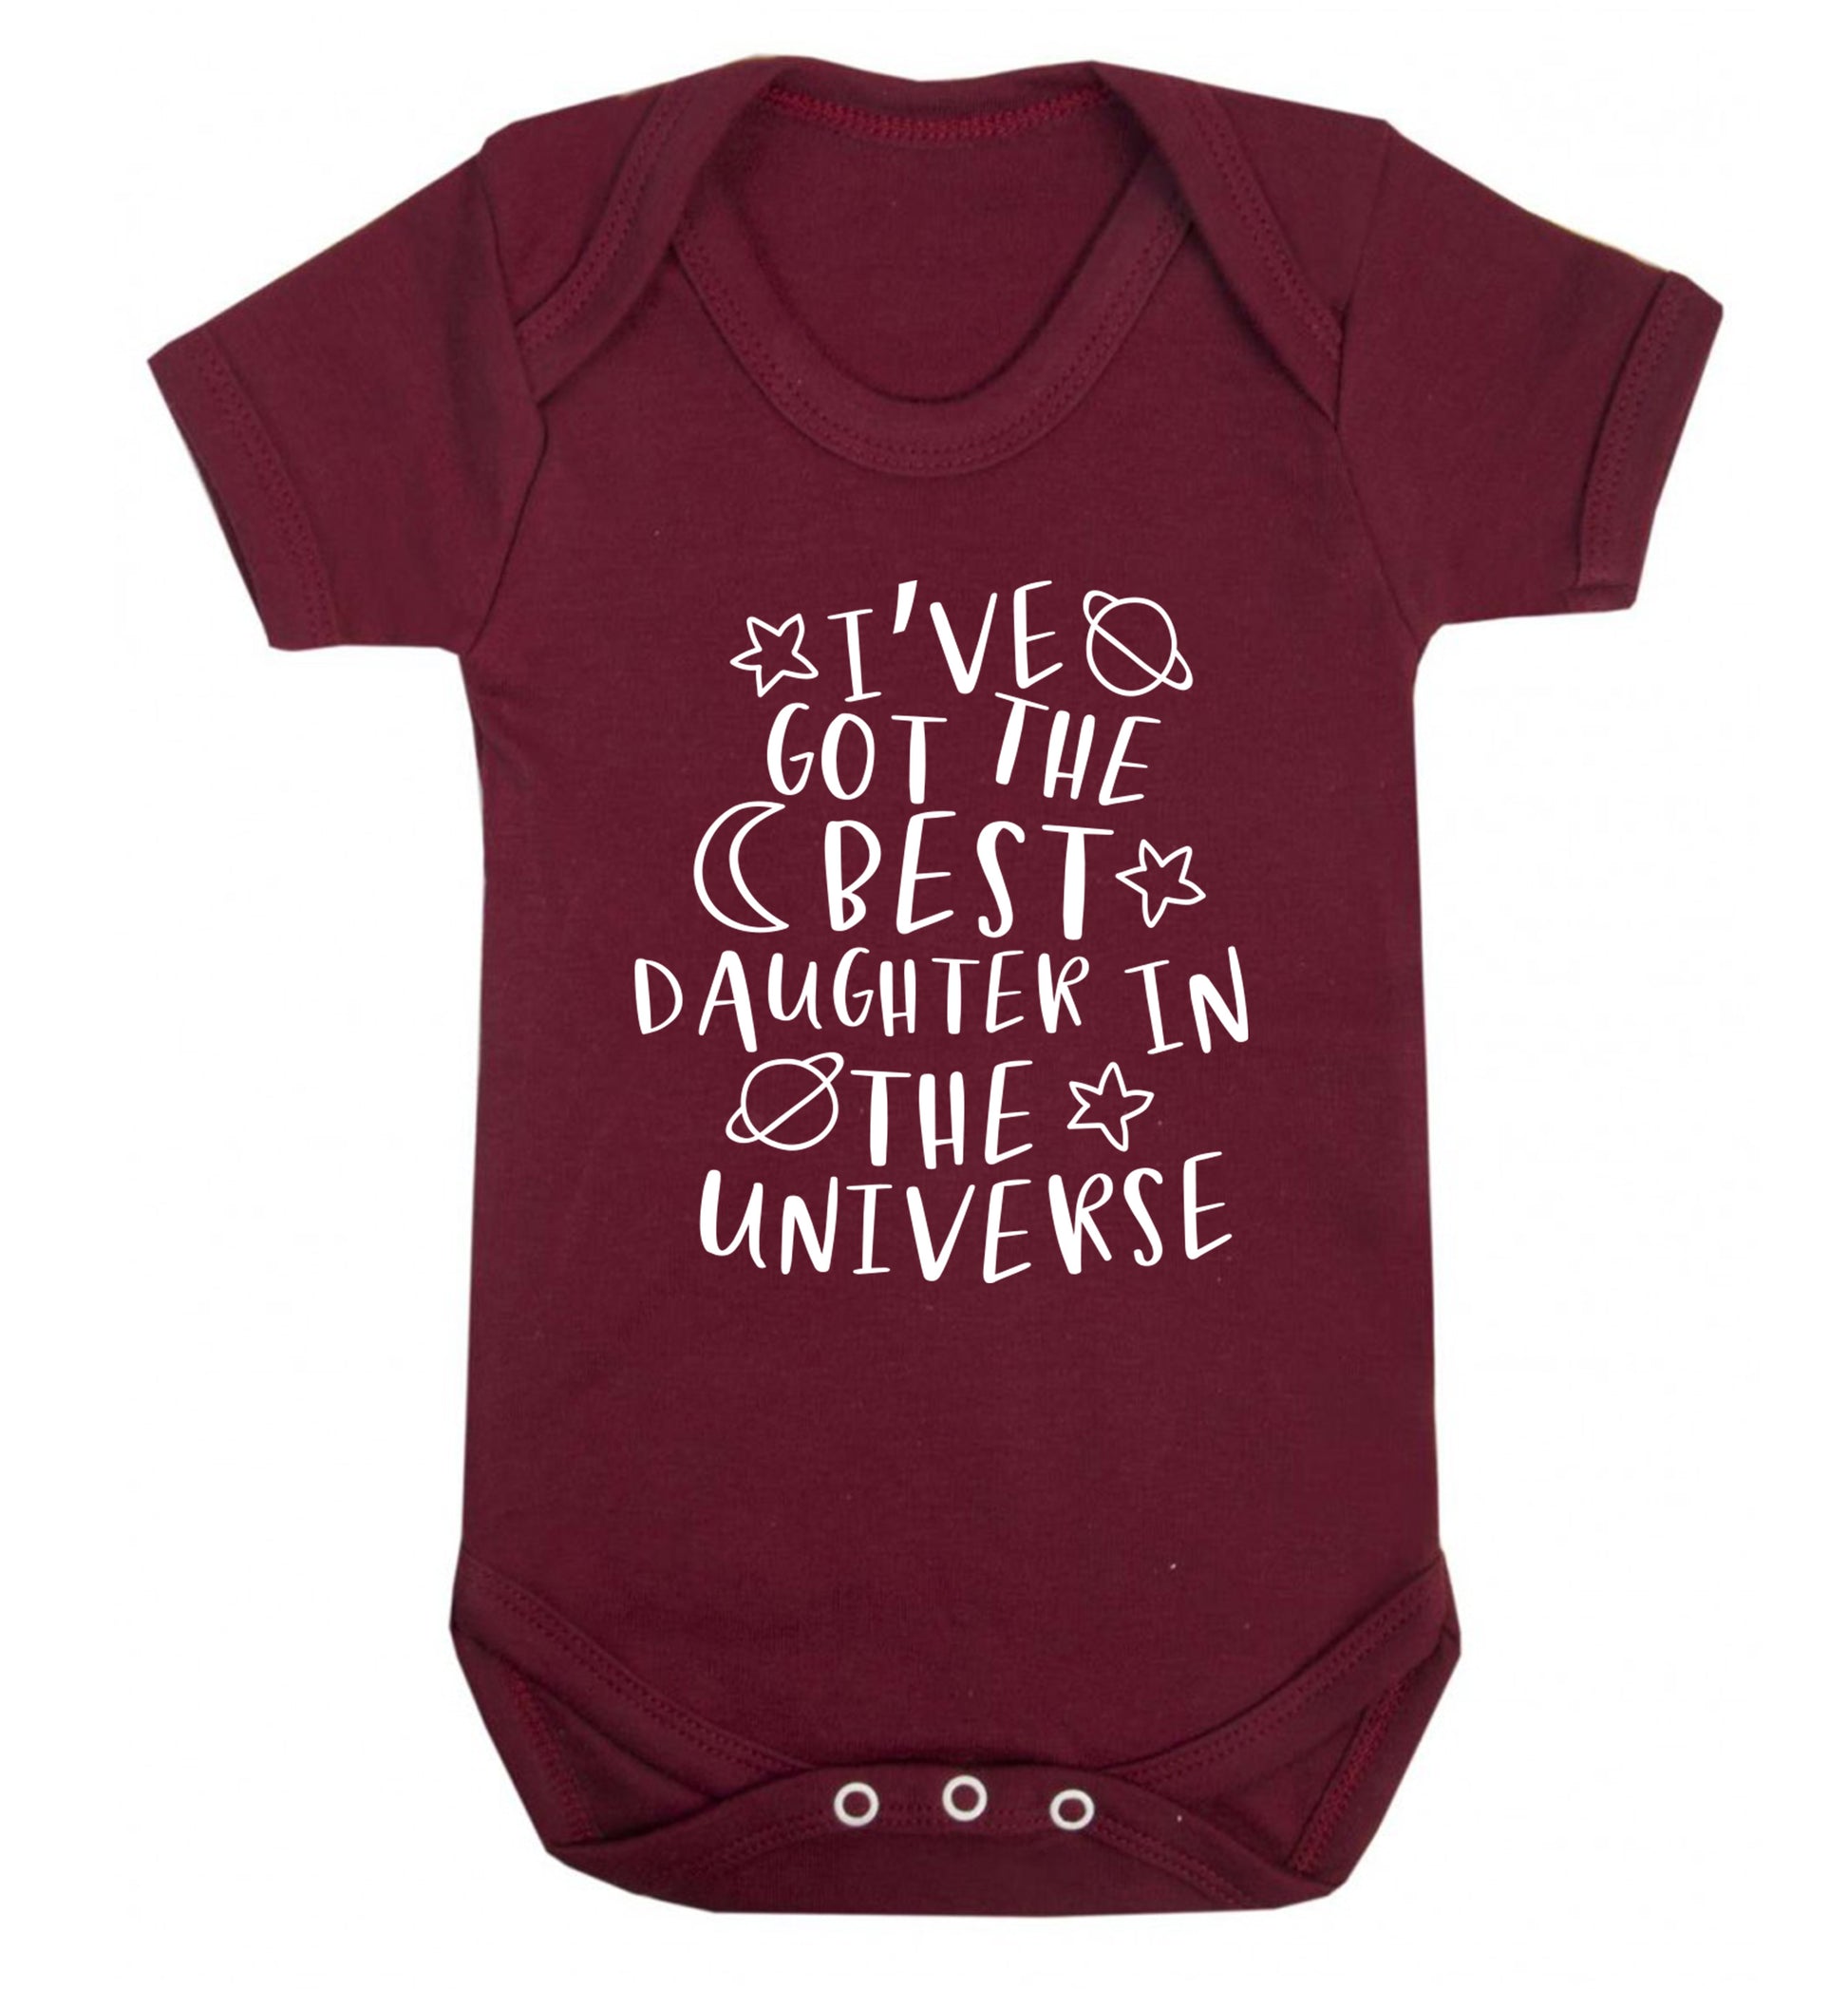 I've got the best daughter in the universe Baby Vest maroon 18-24 months